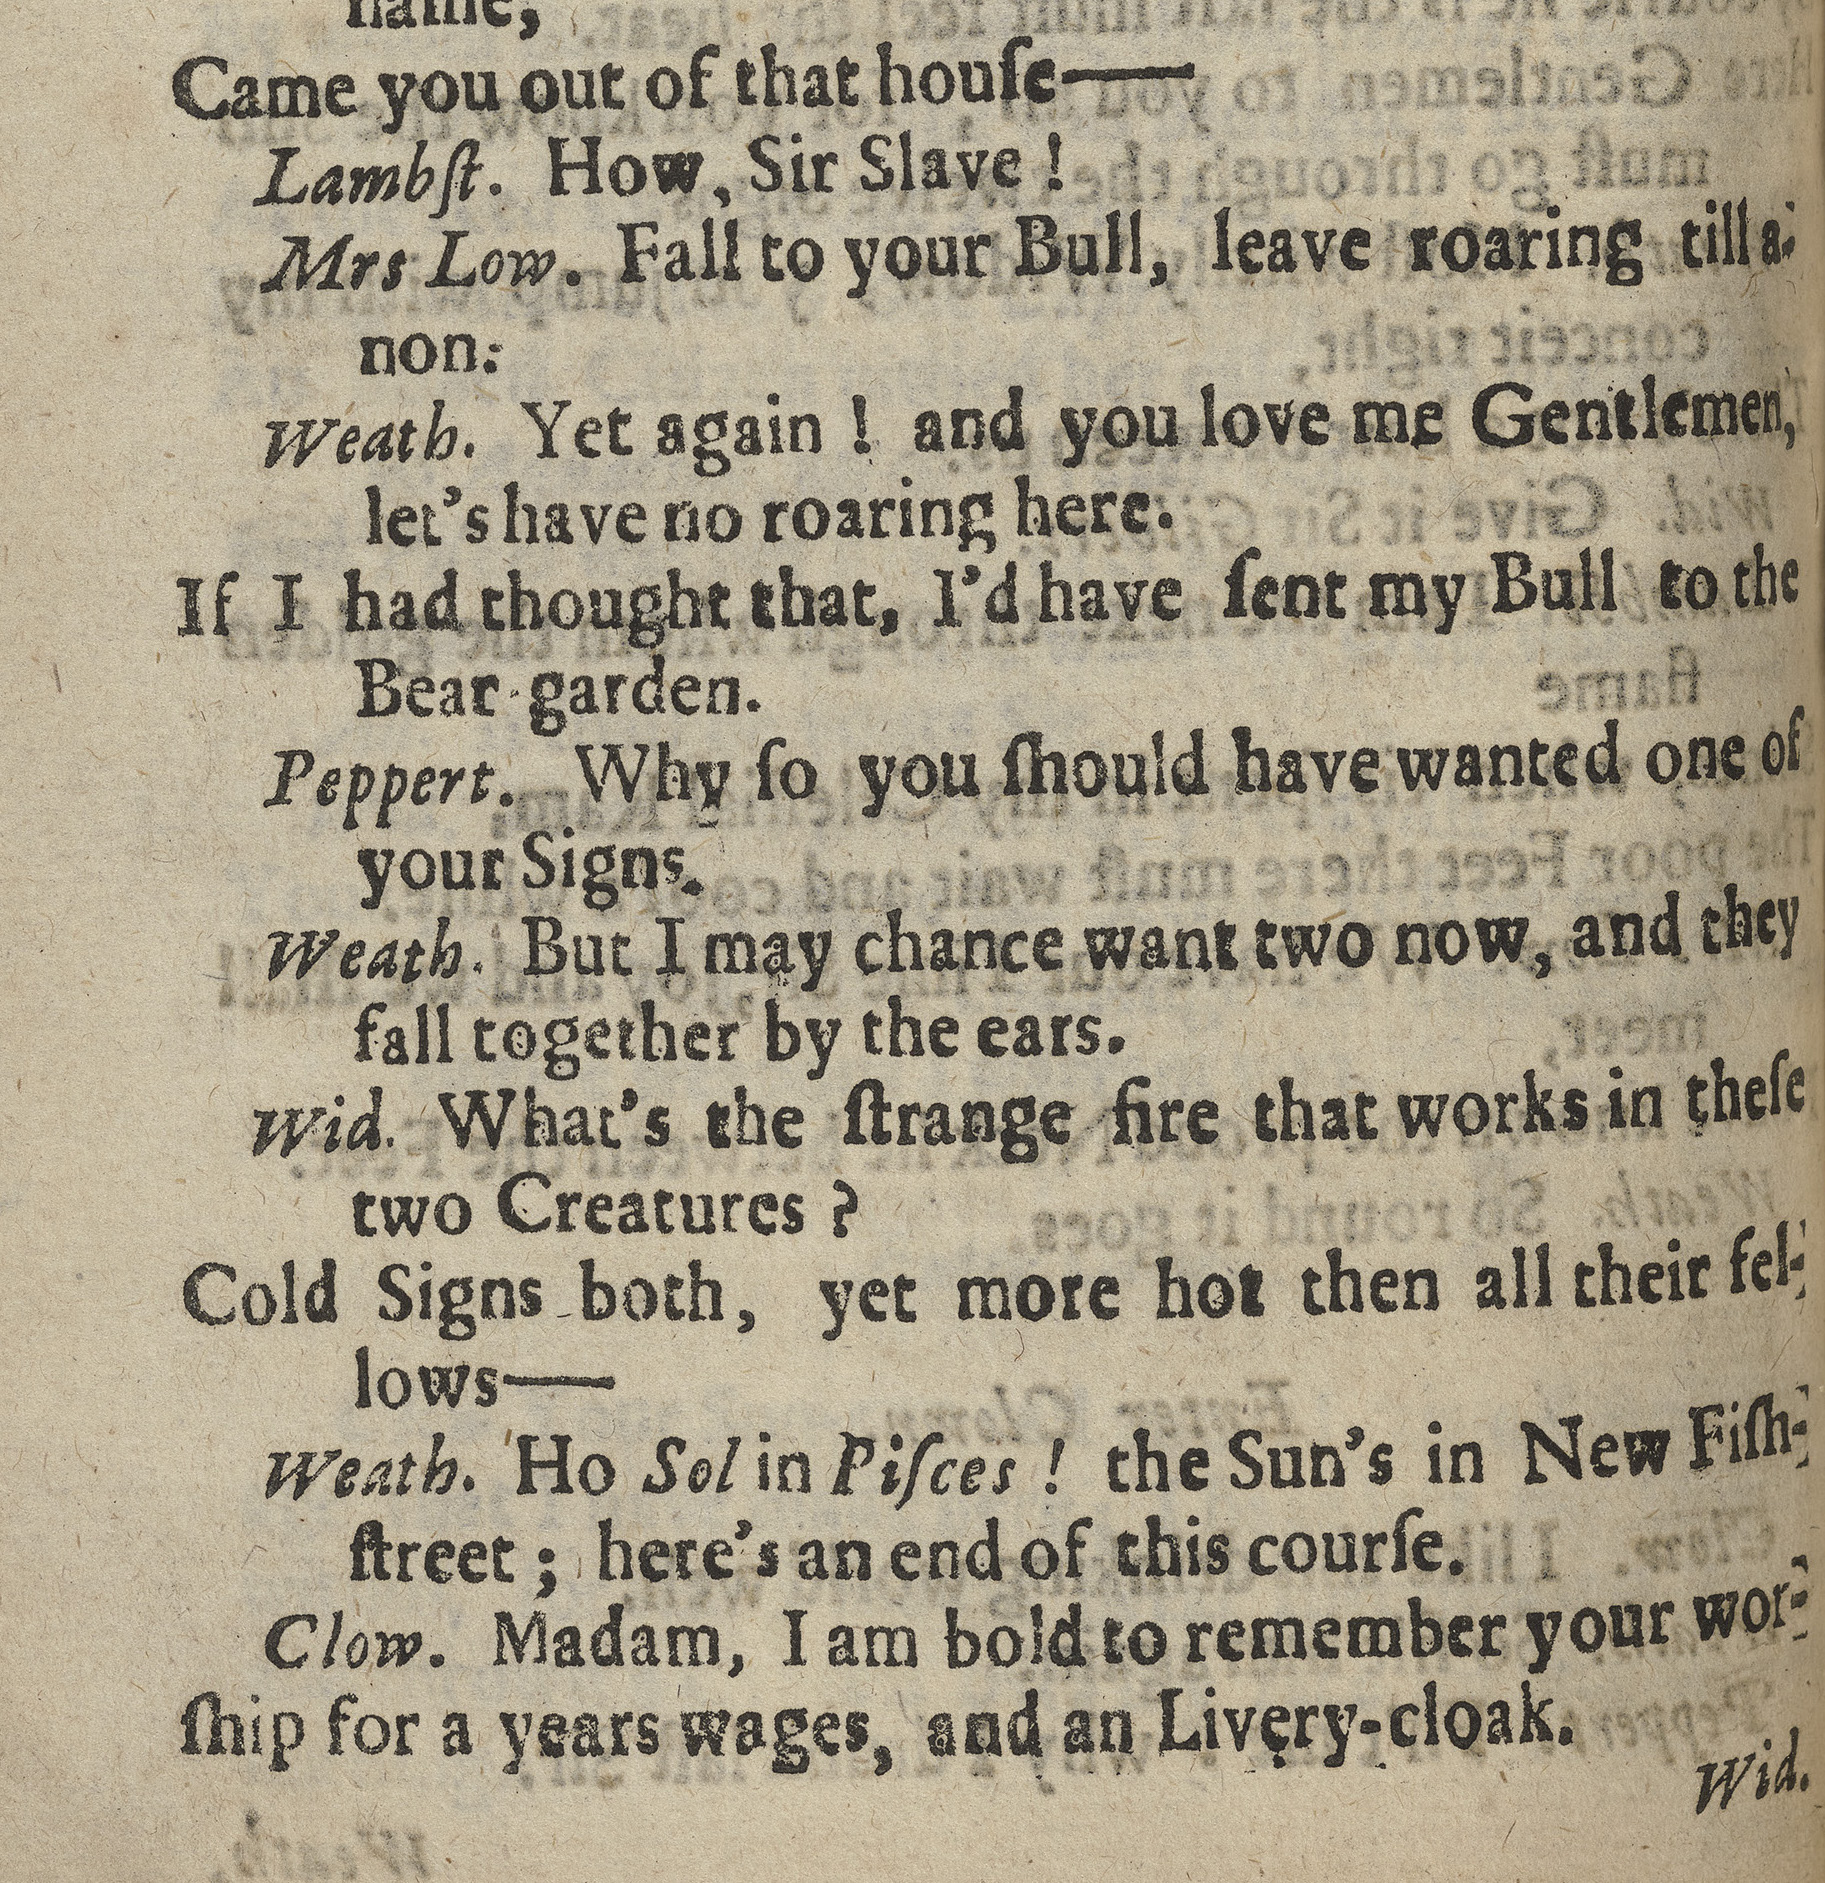 Thomas Middleton (? 1627). No wit, help like a vvomans (London, 1657), 44. STC 165173. Used by permission of the Folger Shakespeare Library.